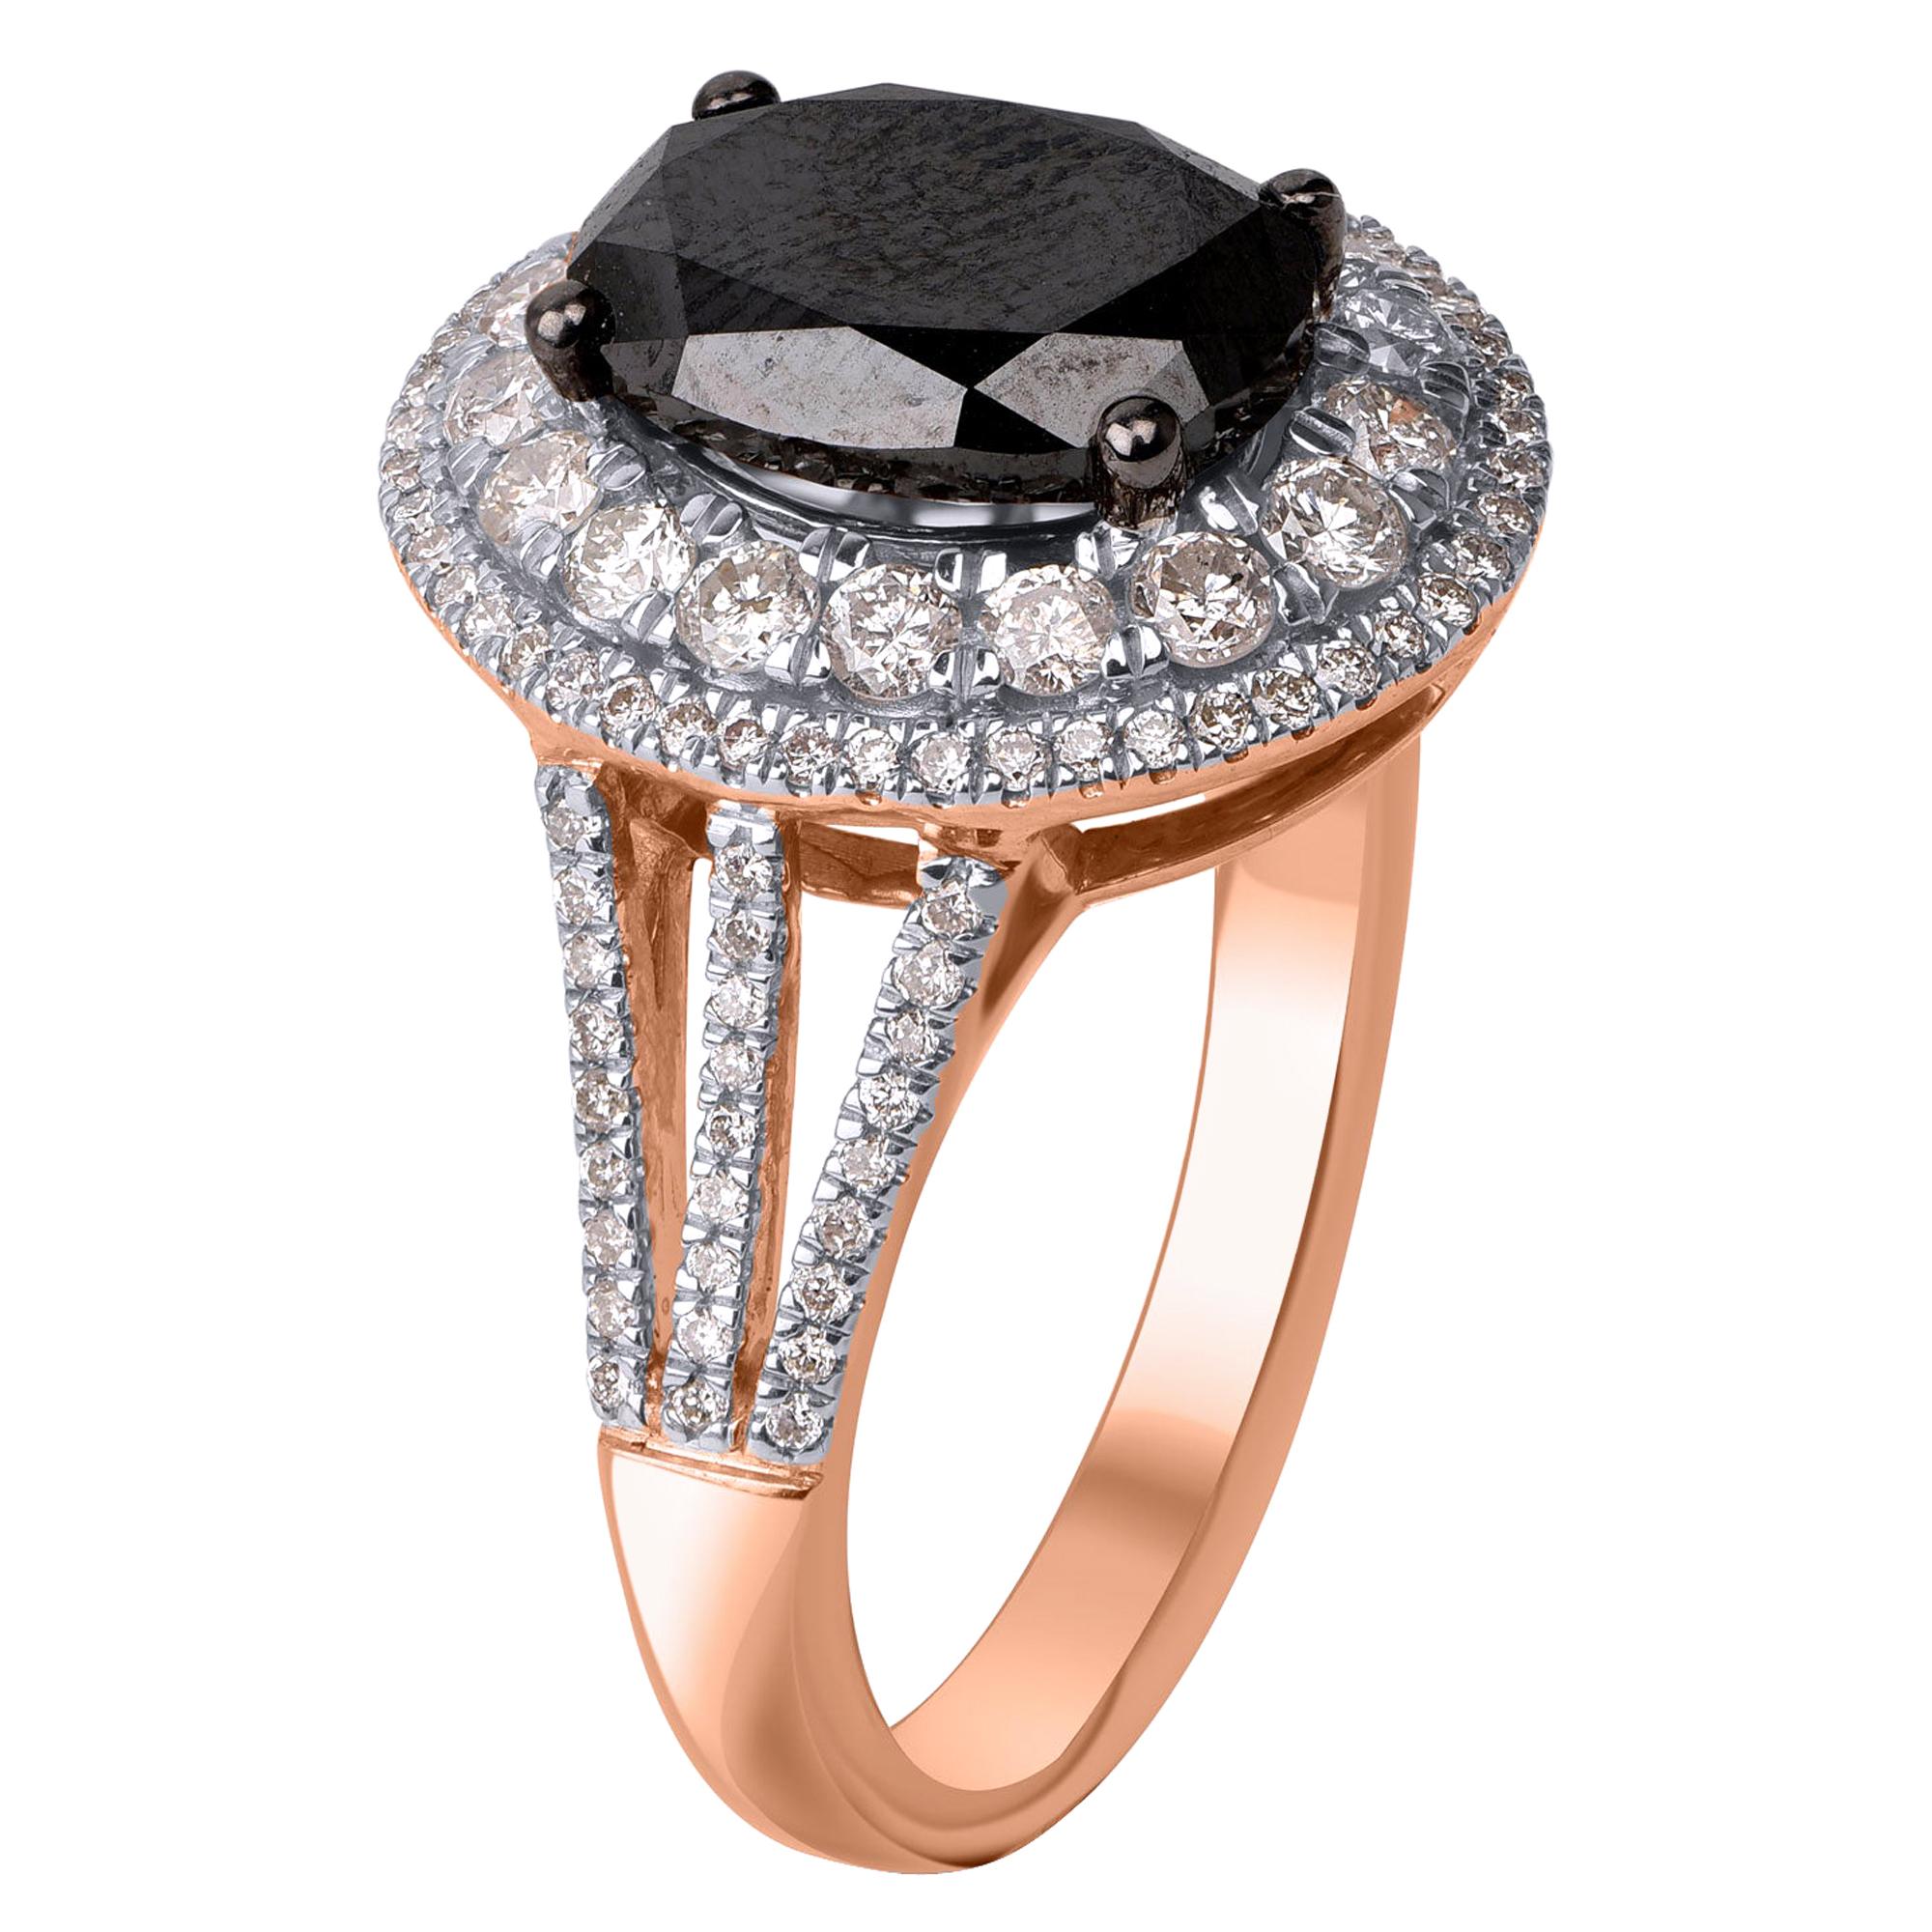 Elegantly designed by our skillful artisans in 14 KT rose gold and studded with 119 brilliant and 1 black diamond in prong setting. Diamonds are graded  HI color, I2 clarity. An updated take on a classic, this sparkling diamond engagement ring is